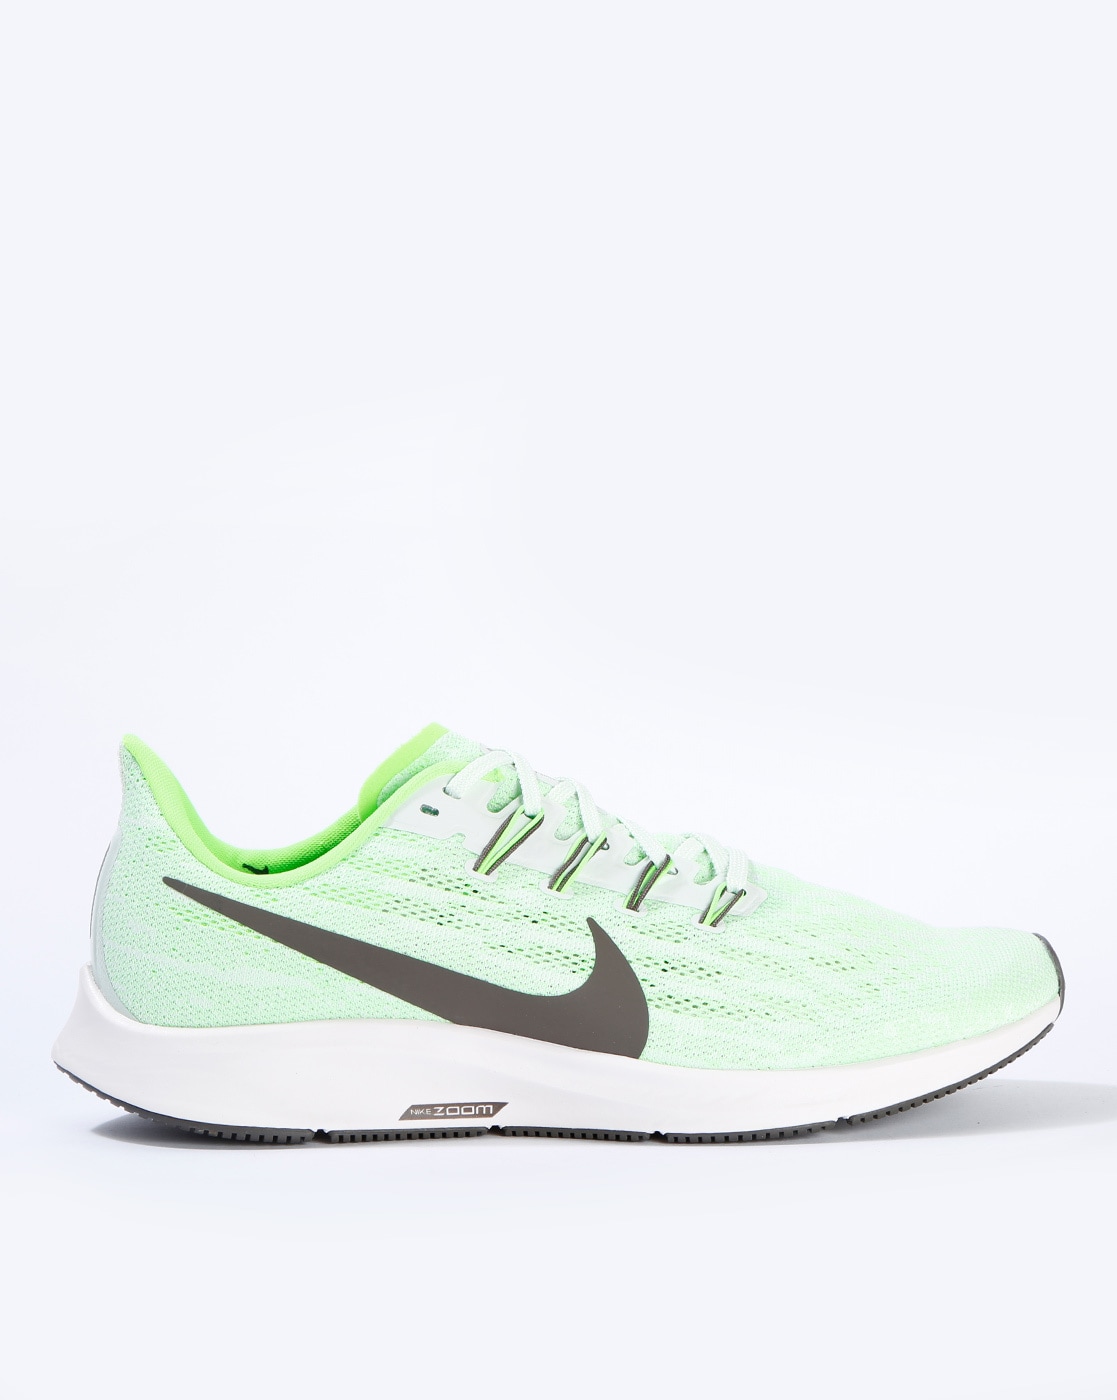 nike shoes india online